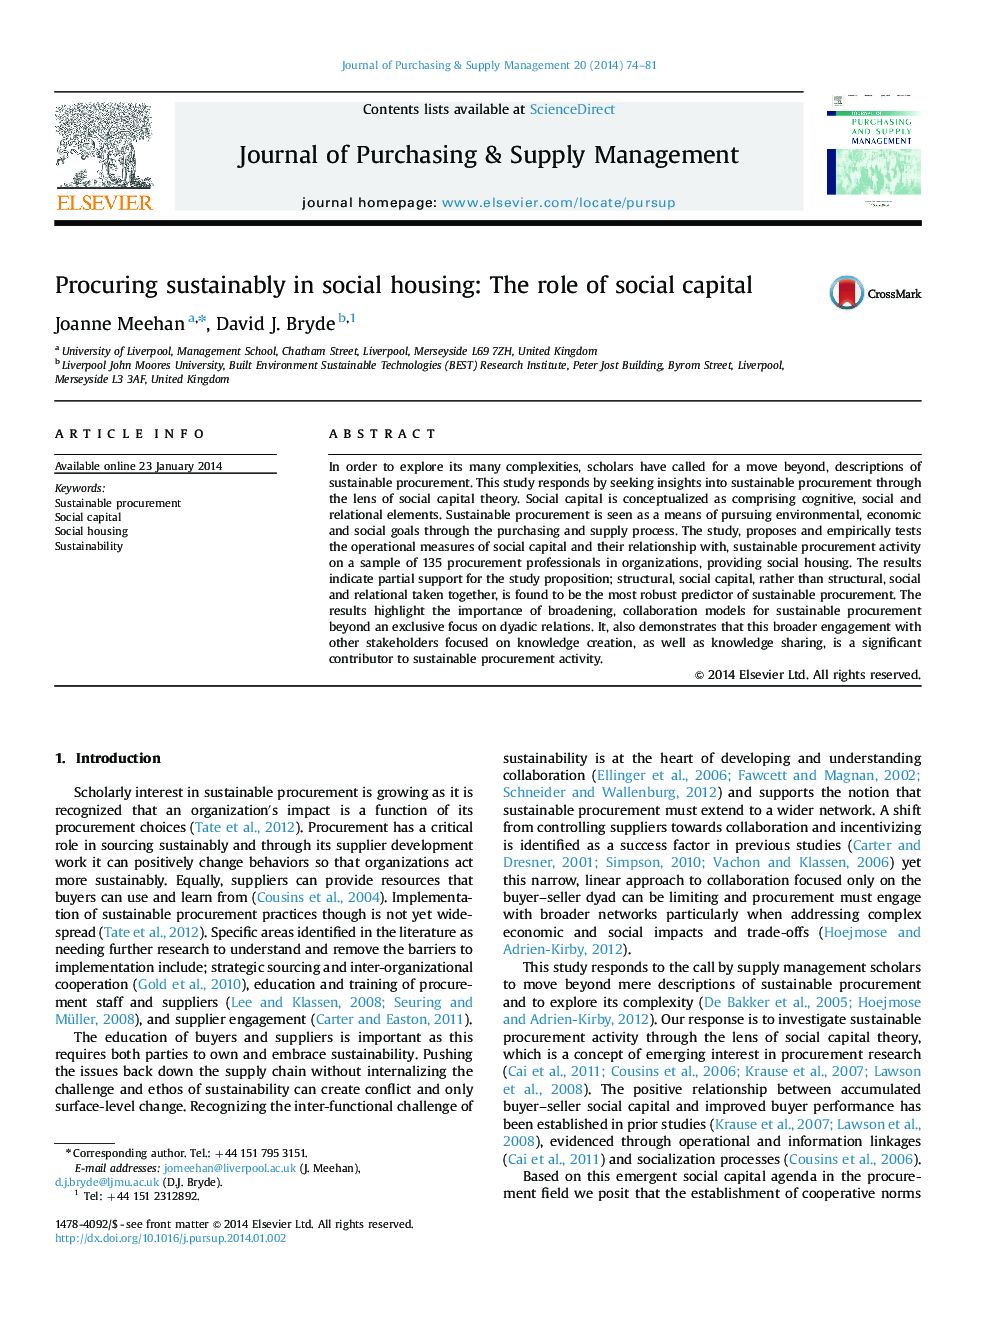 Procuring sustainably in social housing: The role of social capital